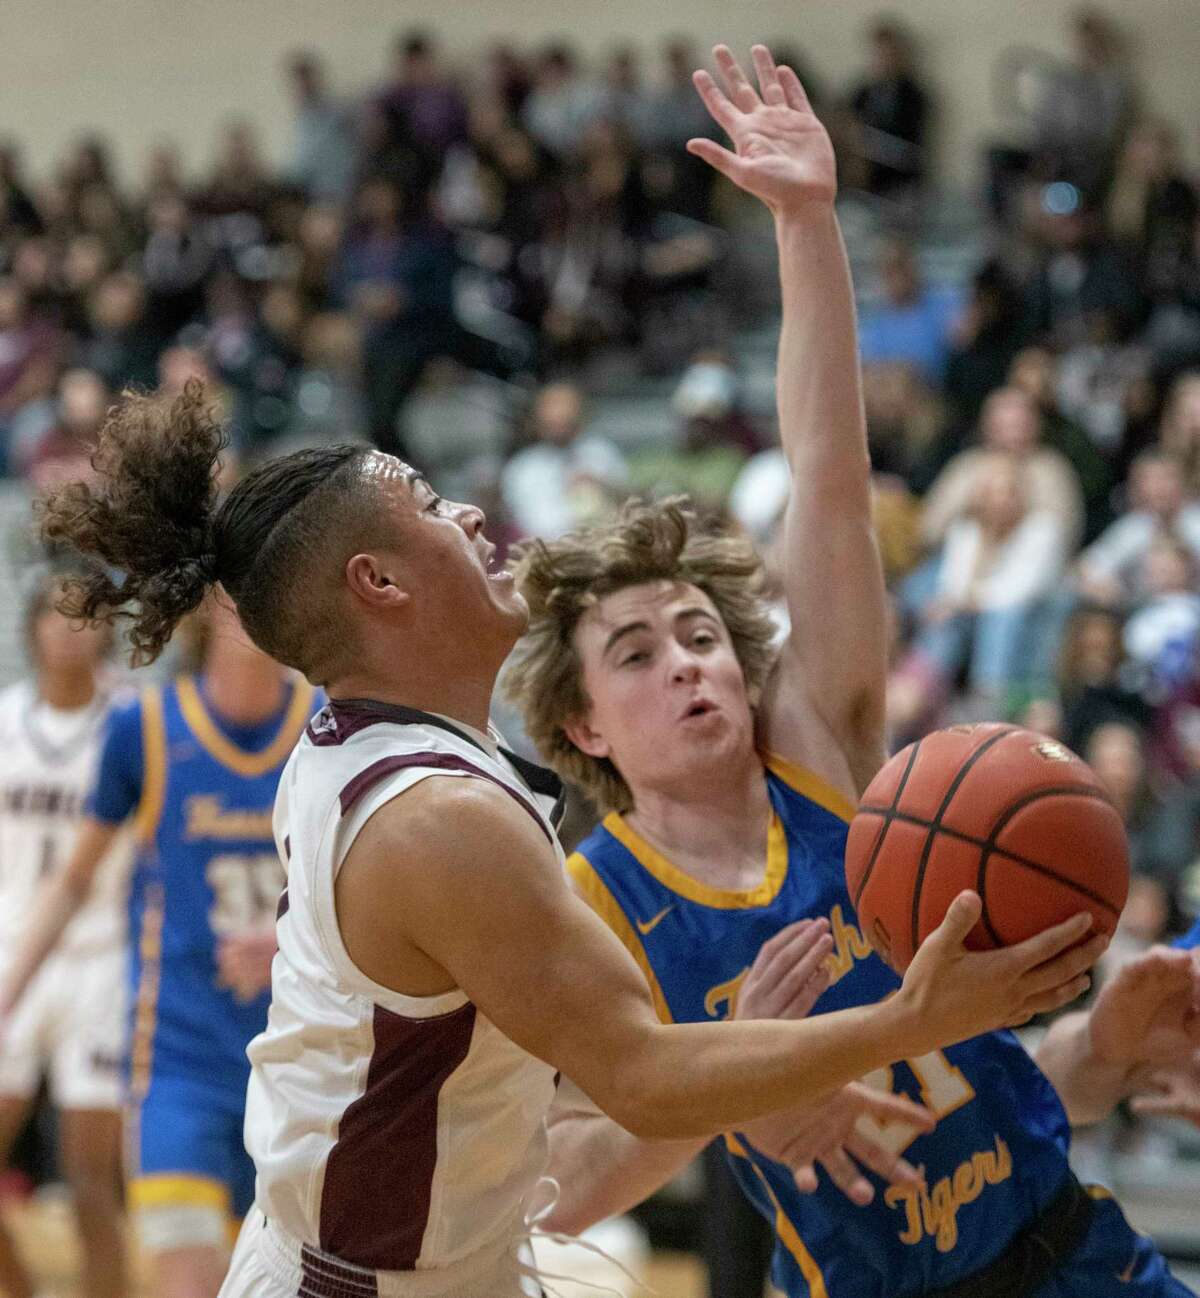 Legacy High's Donny Bishop drives to the basket as he is fouled by Frenship's Dylan Kinsey 01/25/2022 the Legacy High gym. Tim Fischer/Reporter-Telegram